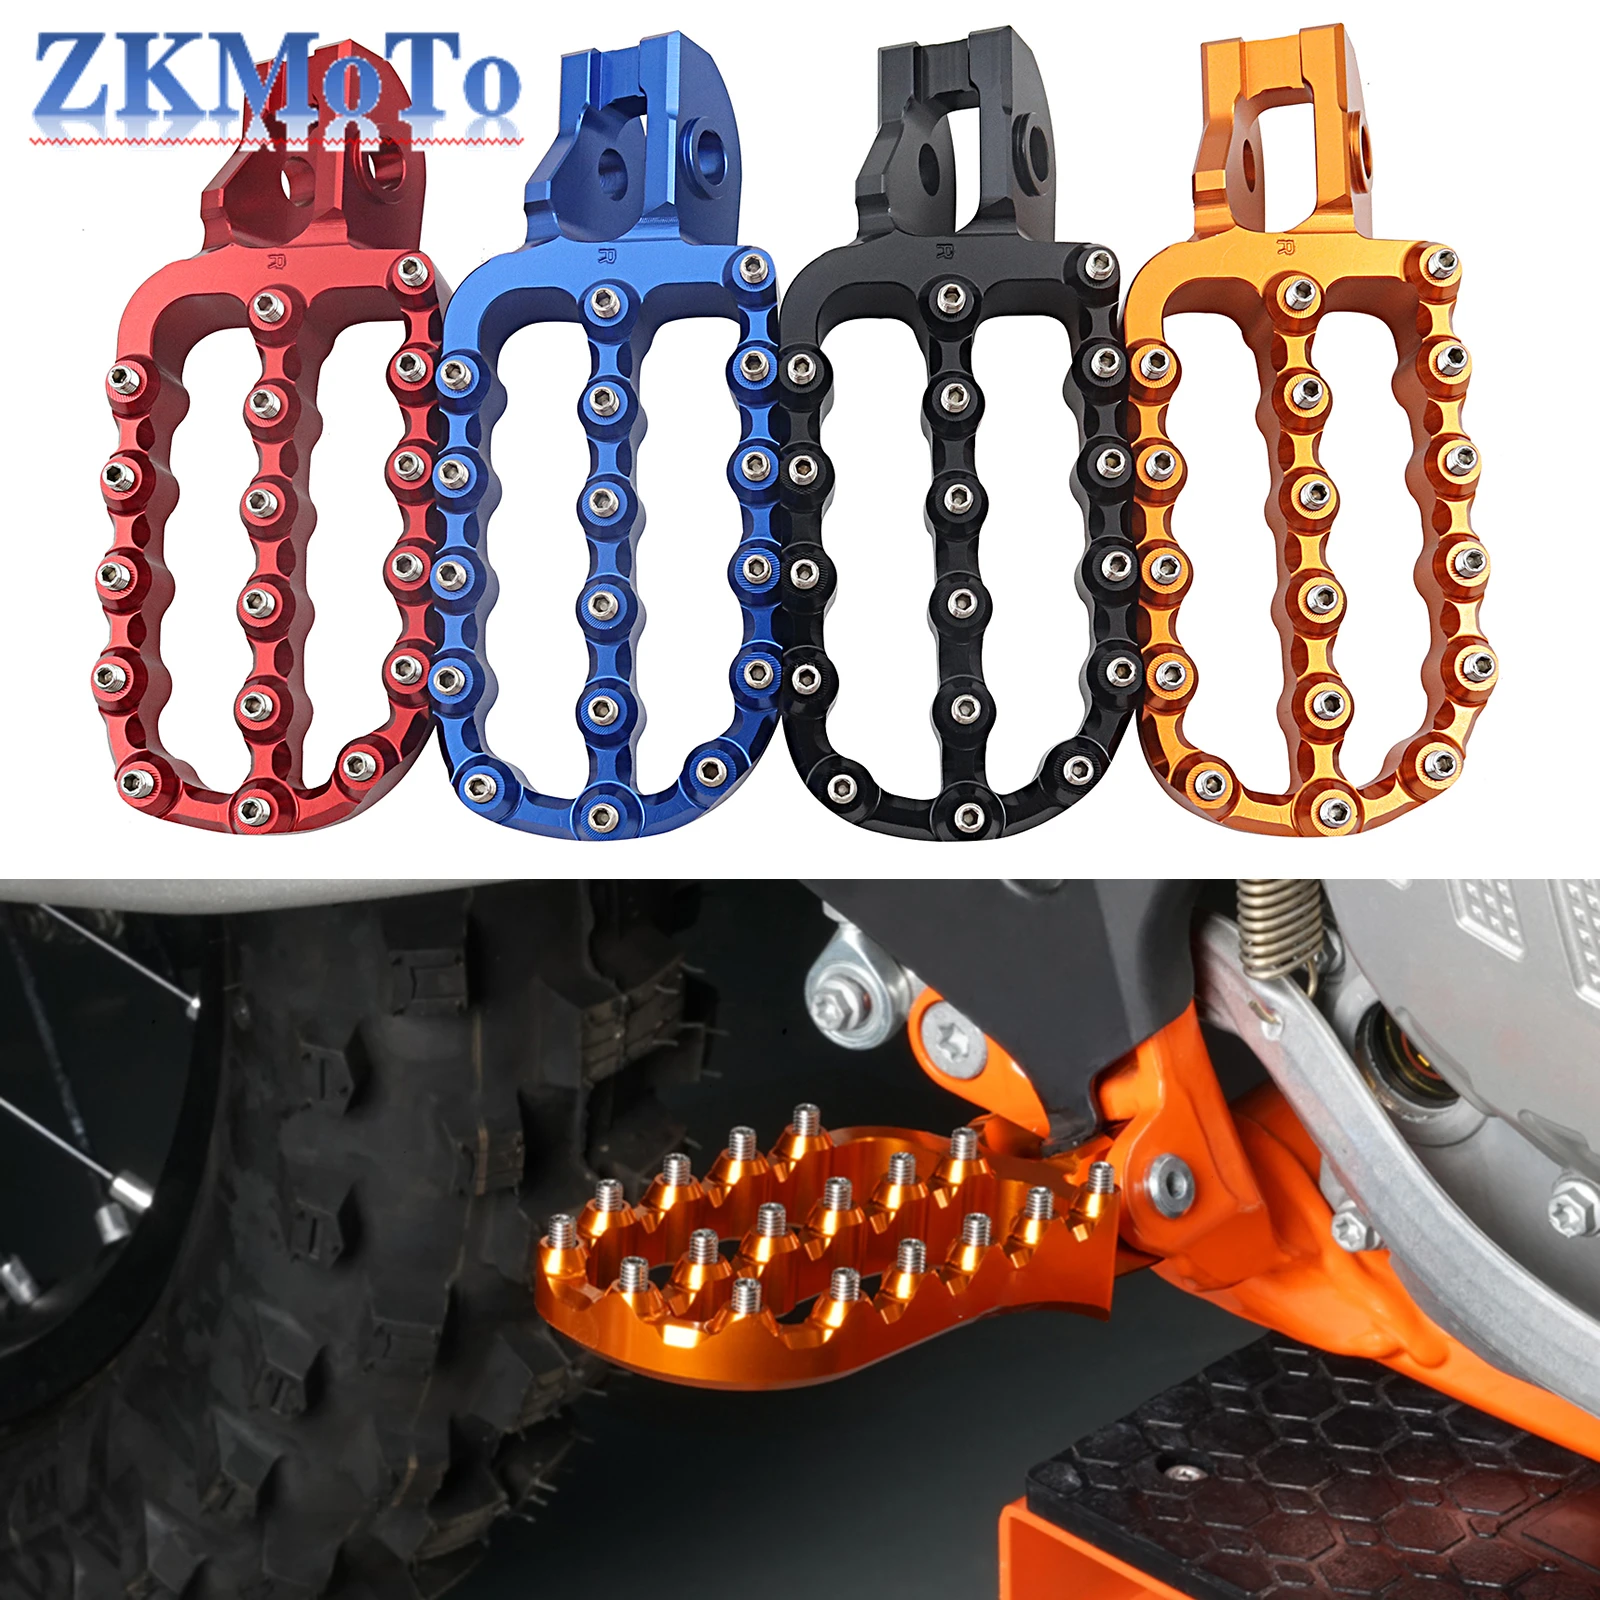 Motorcycle CNC Extended Pedal For KTM EXC EXCF XC XCF SX SXF 125-500 For - $55.77